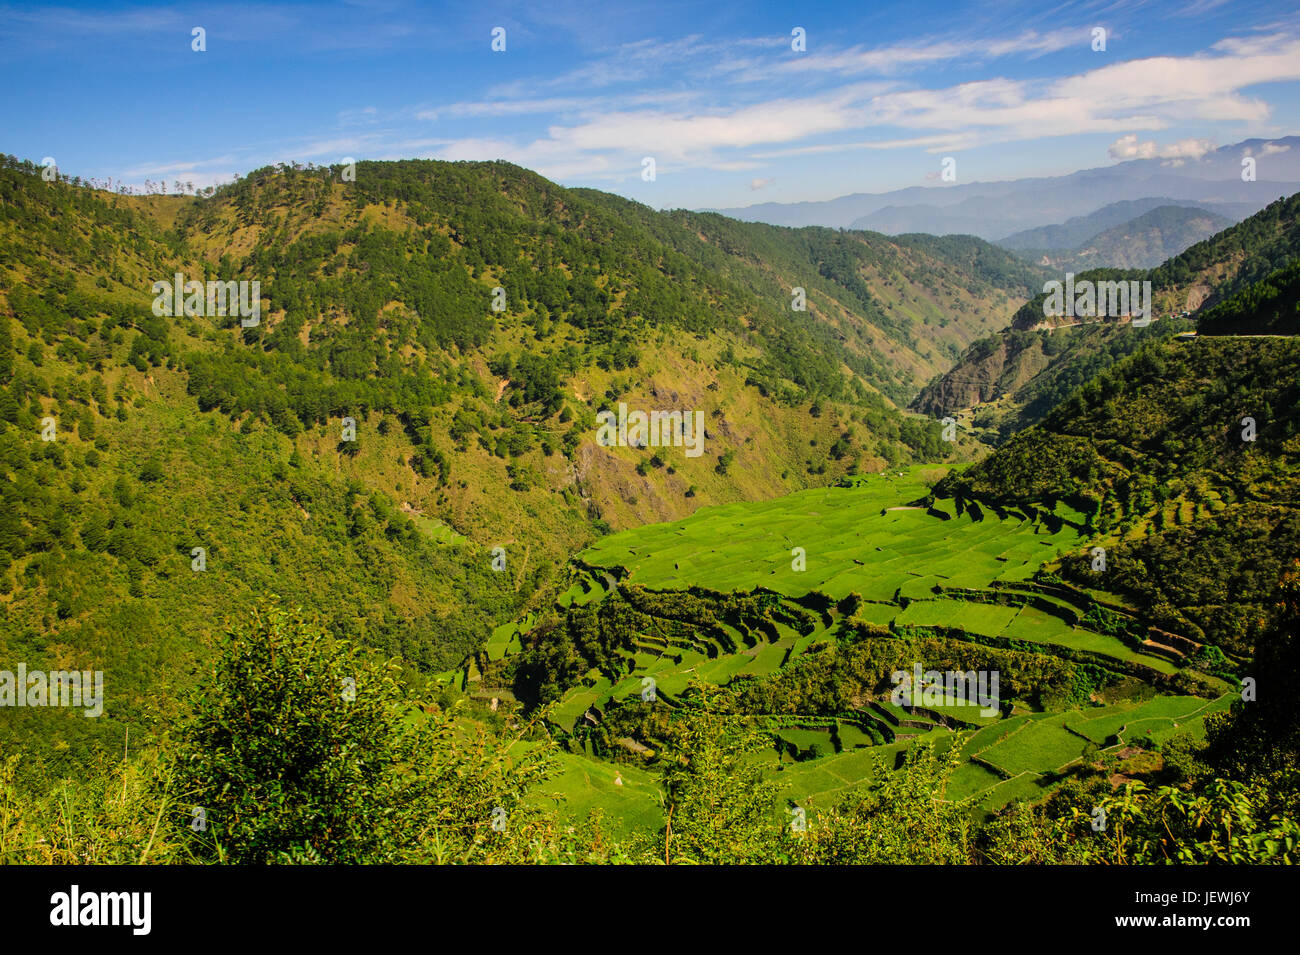 Along the rice terraces from Bontoc to Banaue, Luzon, Philippines Stock Photo